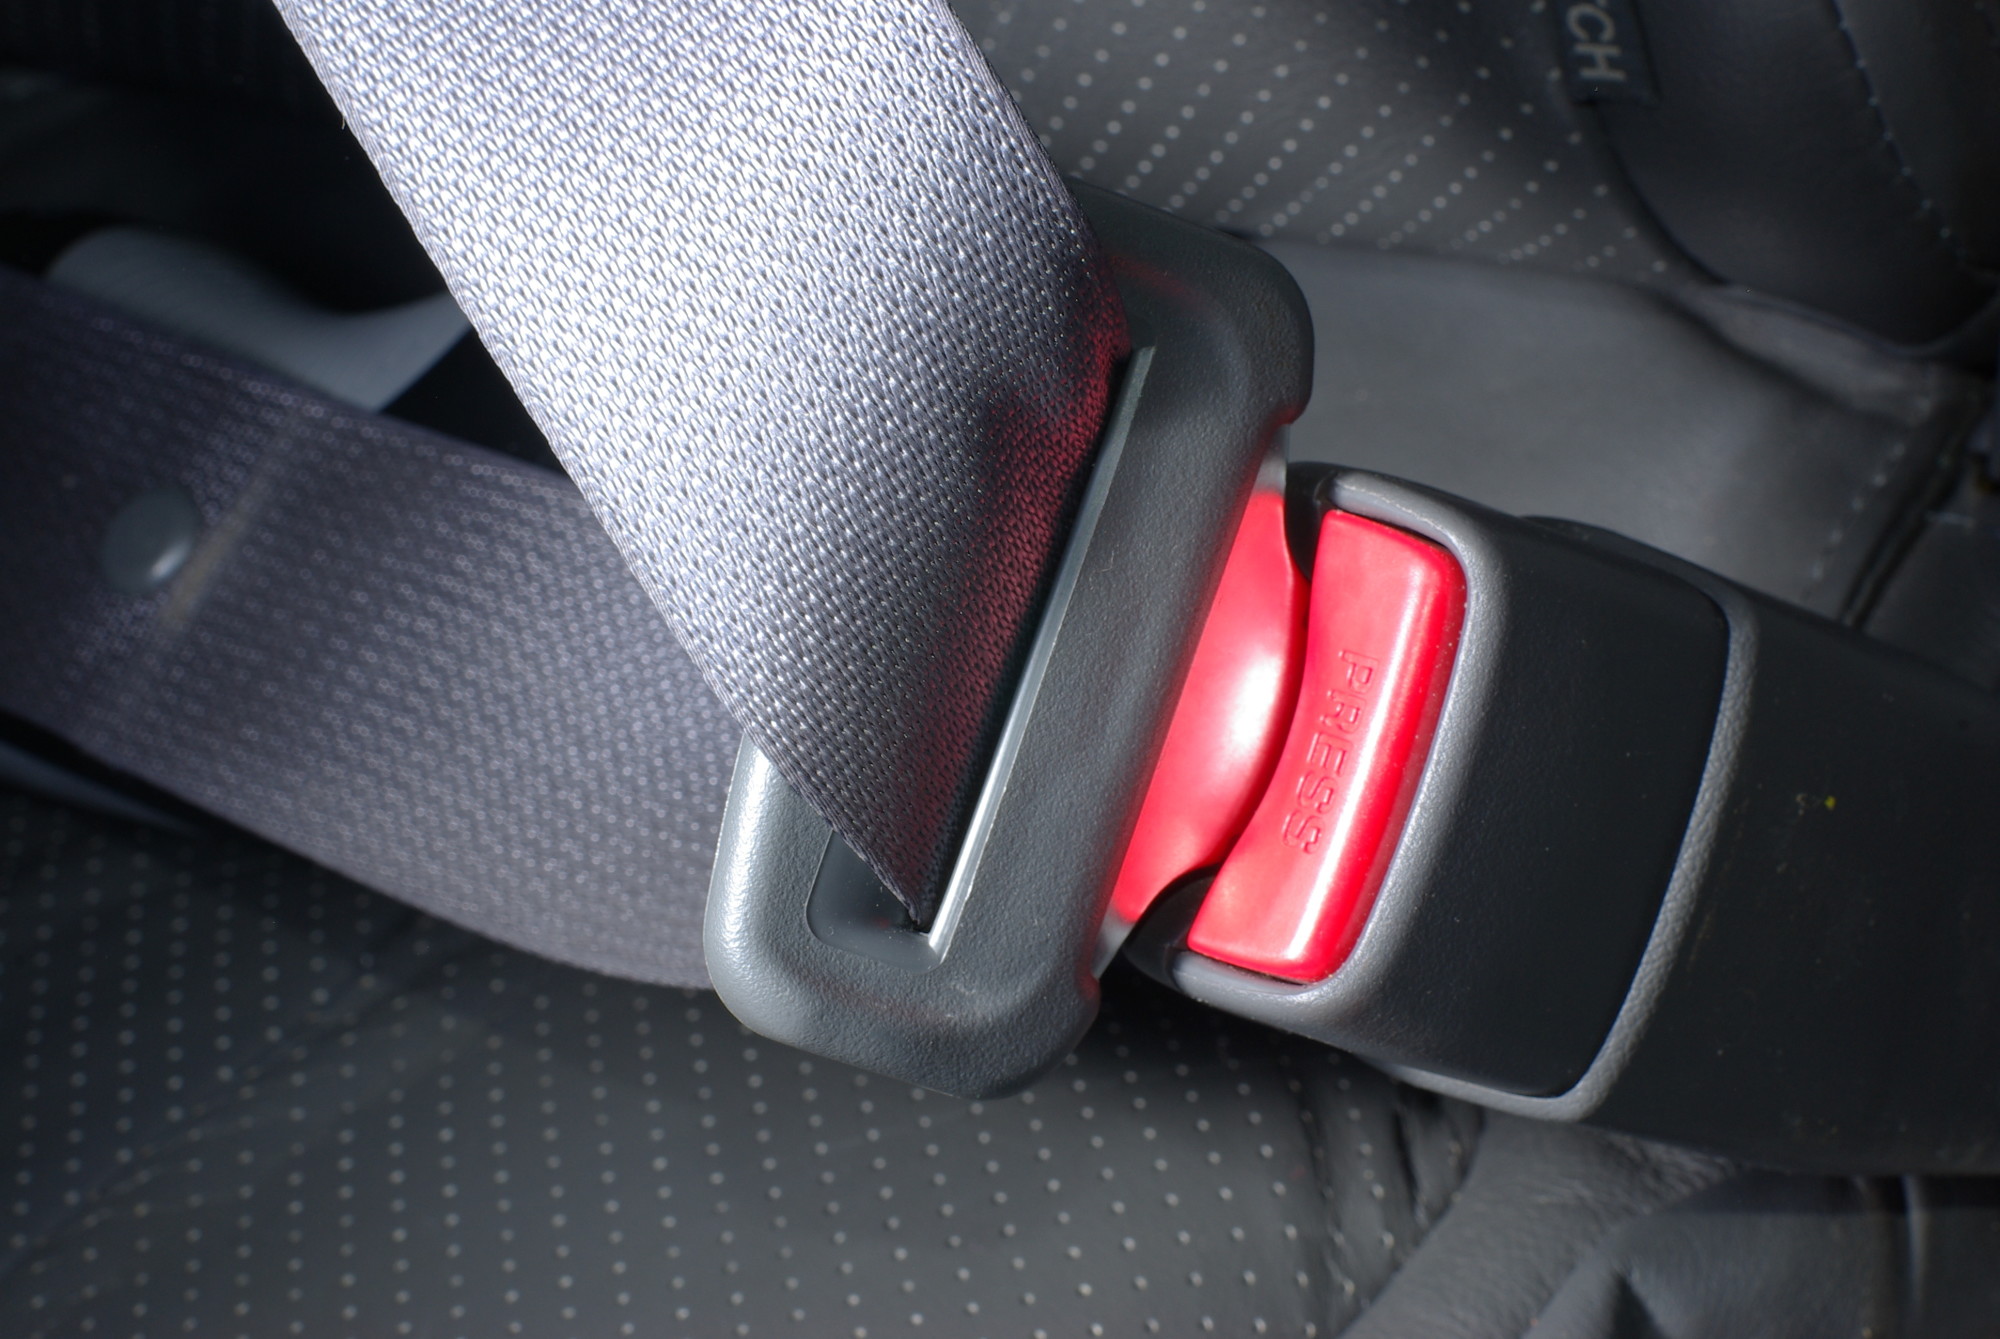 Seat Belt Repair: How to Fix a Faulty Seat Belt Buckle